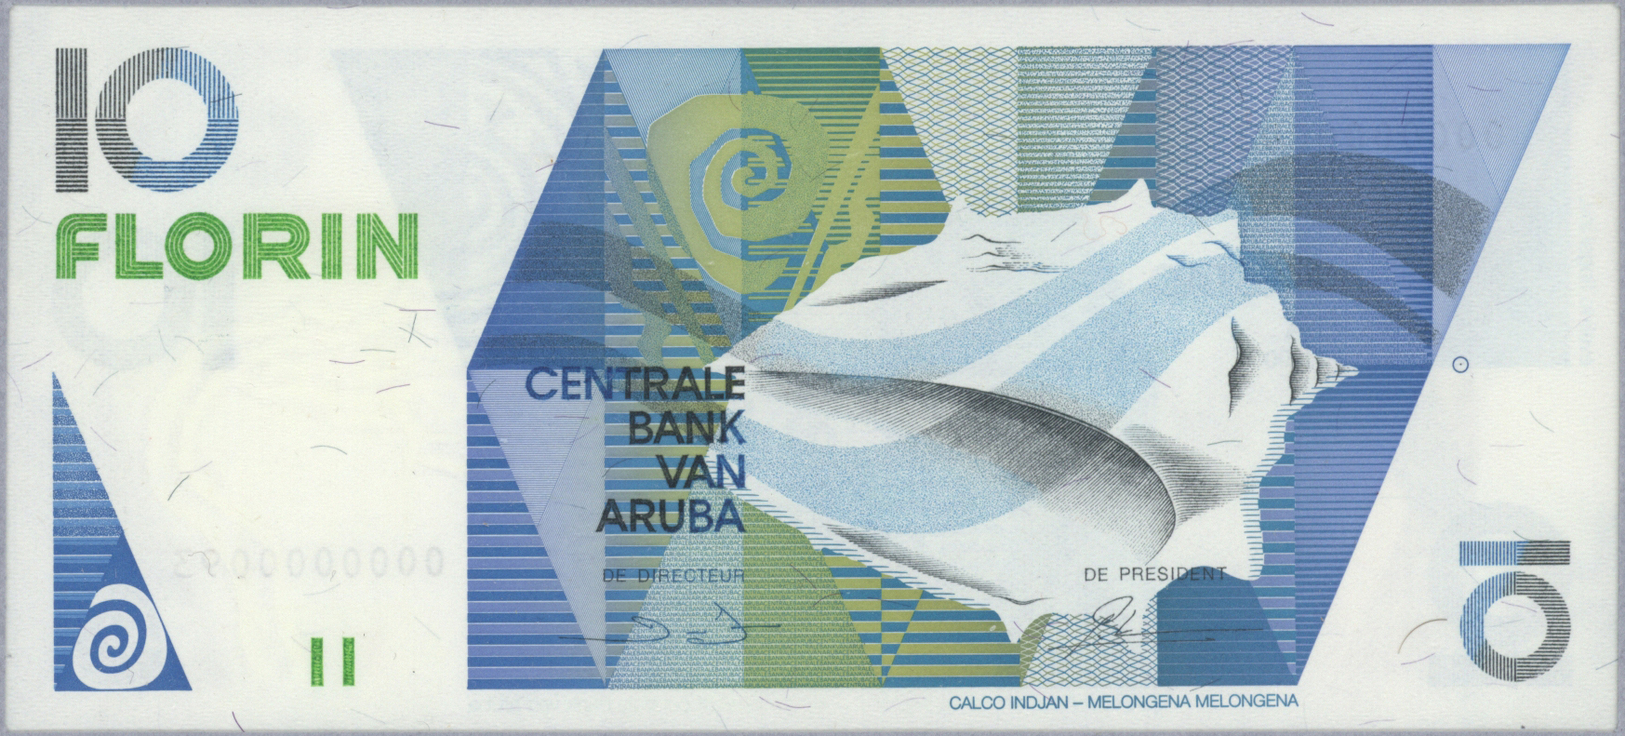 00063 Aruba: Official Collectors Book Issued By The Central Bank Of Aruba Commemorating The First Banknote Series Of Nat - Aruba (1986-...)